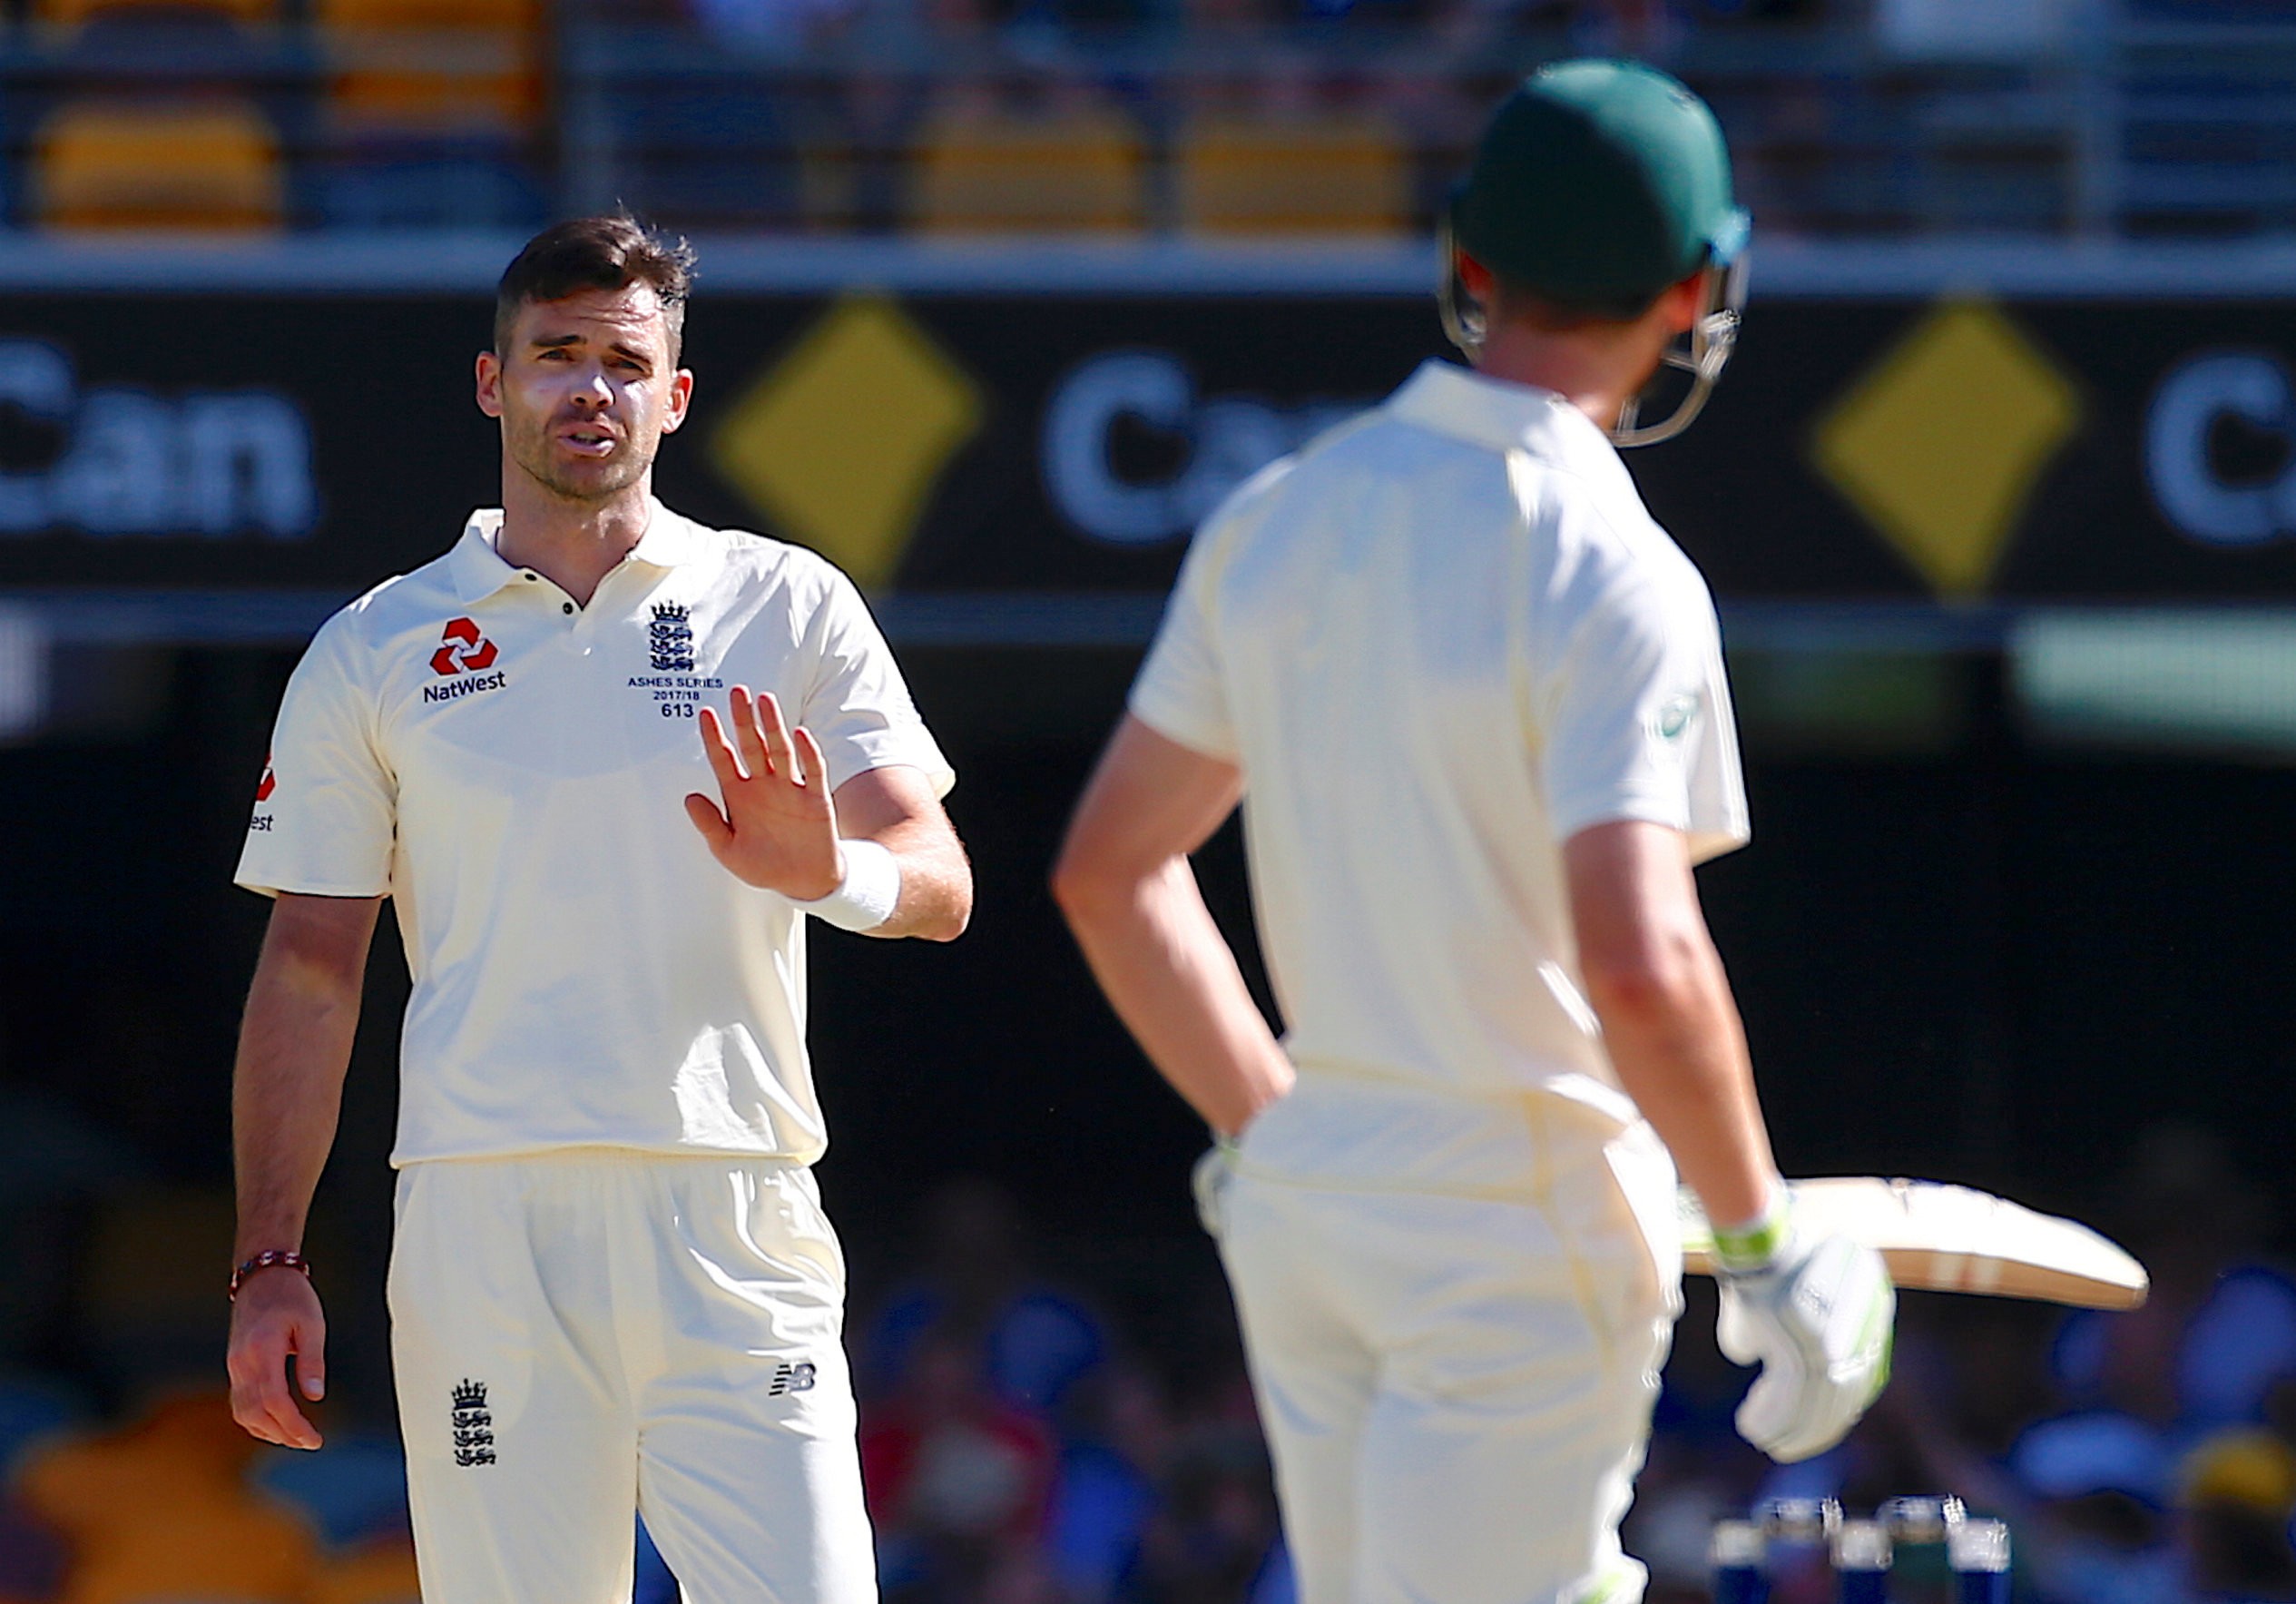 England’s James Anderson is confident going into the second test of the Ashes. Photo: Reuters